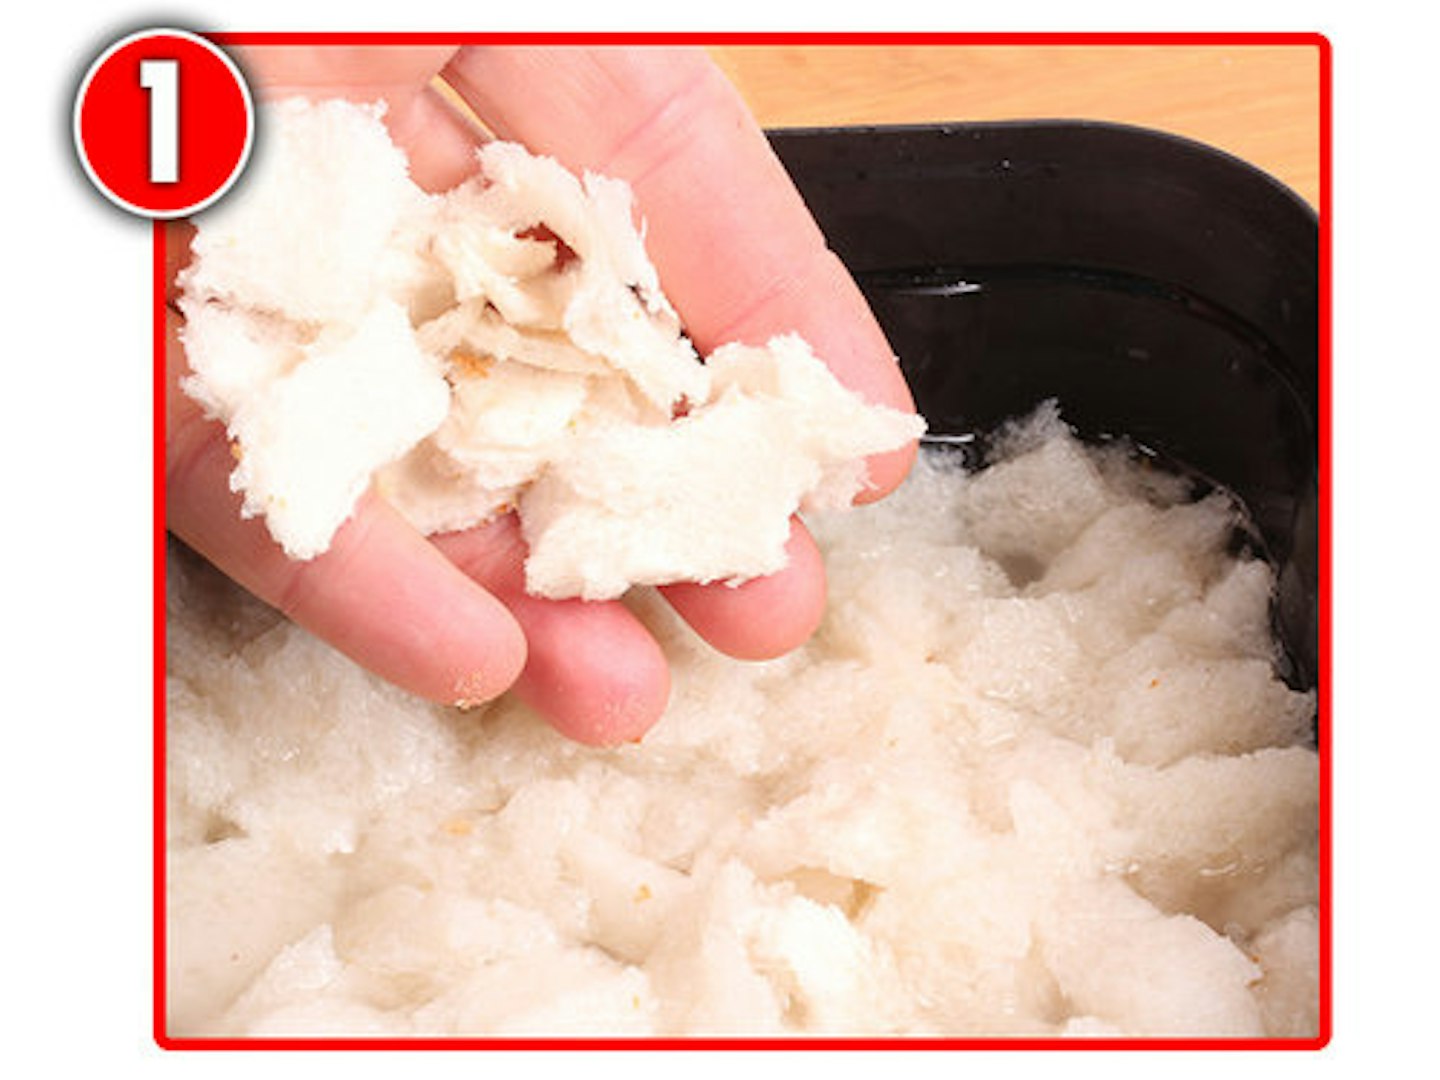 Tear the bread into small chunks and soak in river water. 